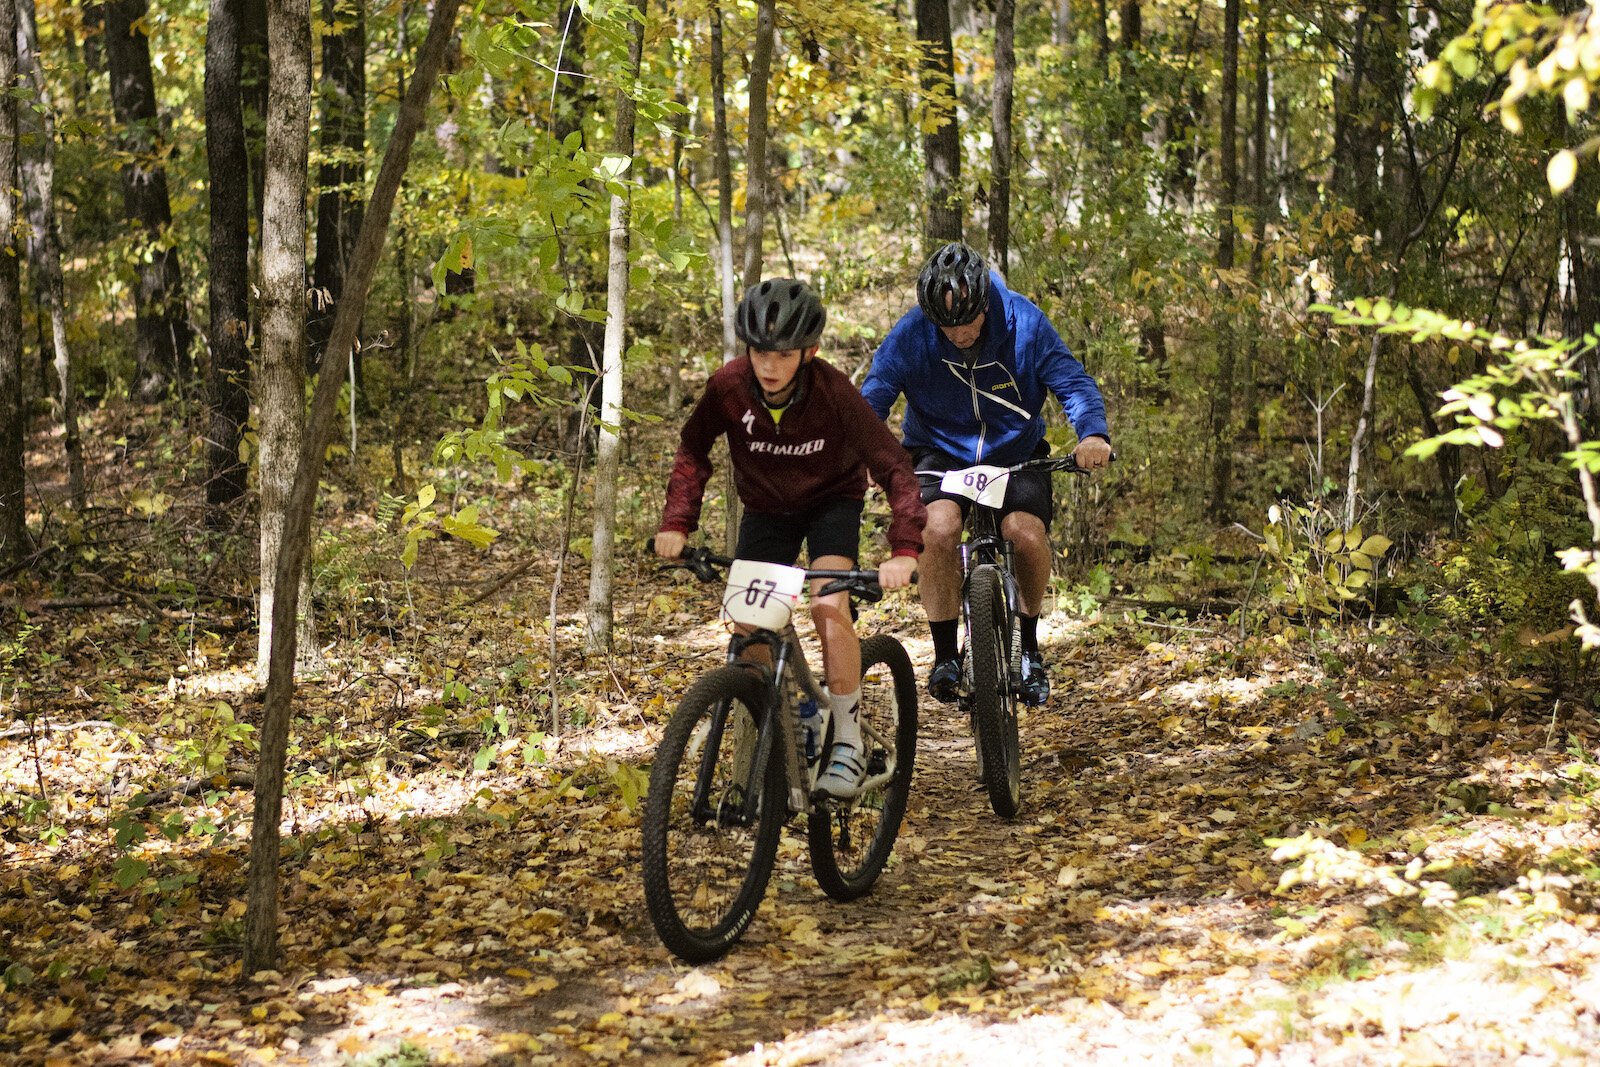 Bikers of all ages enjoy the trail fest.